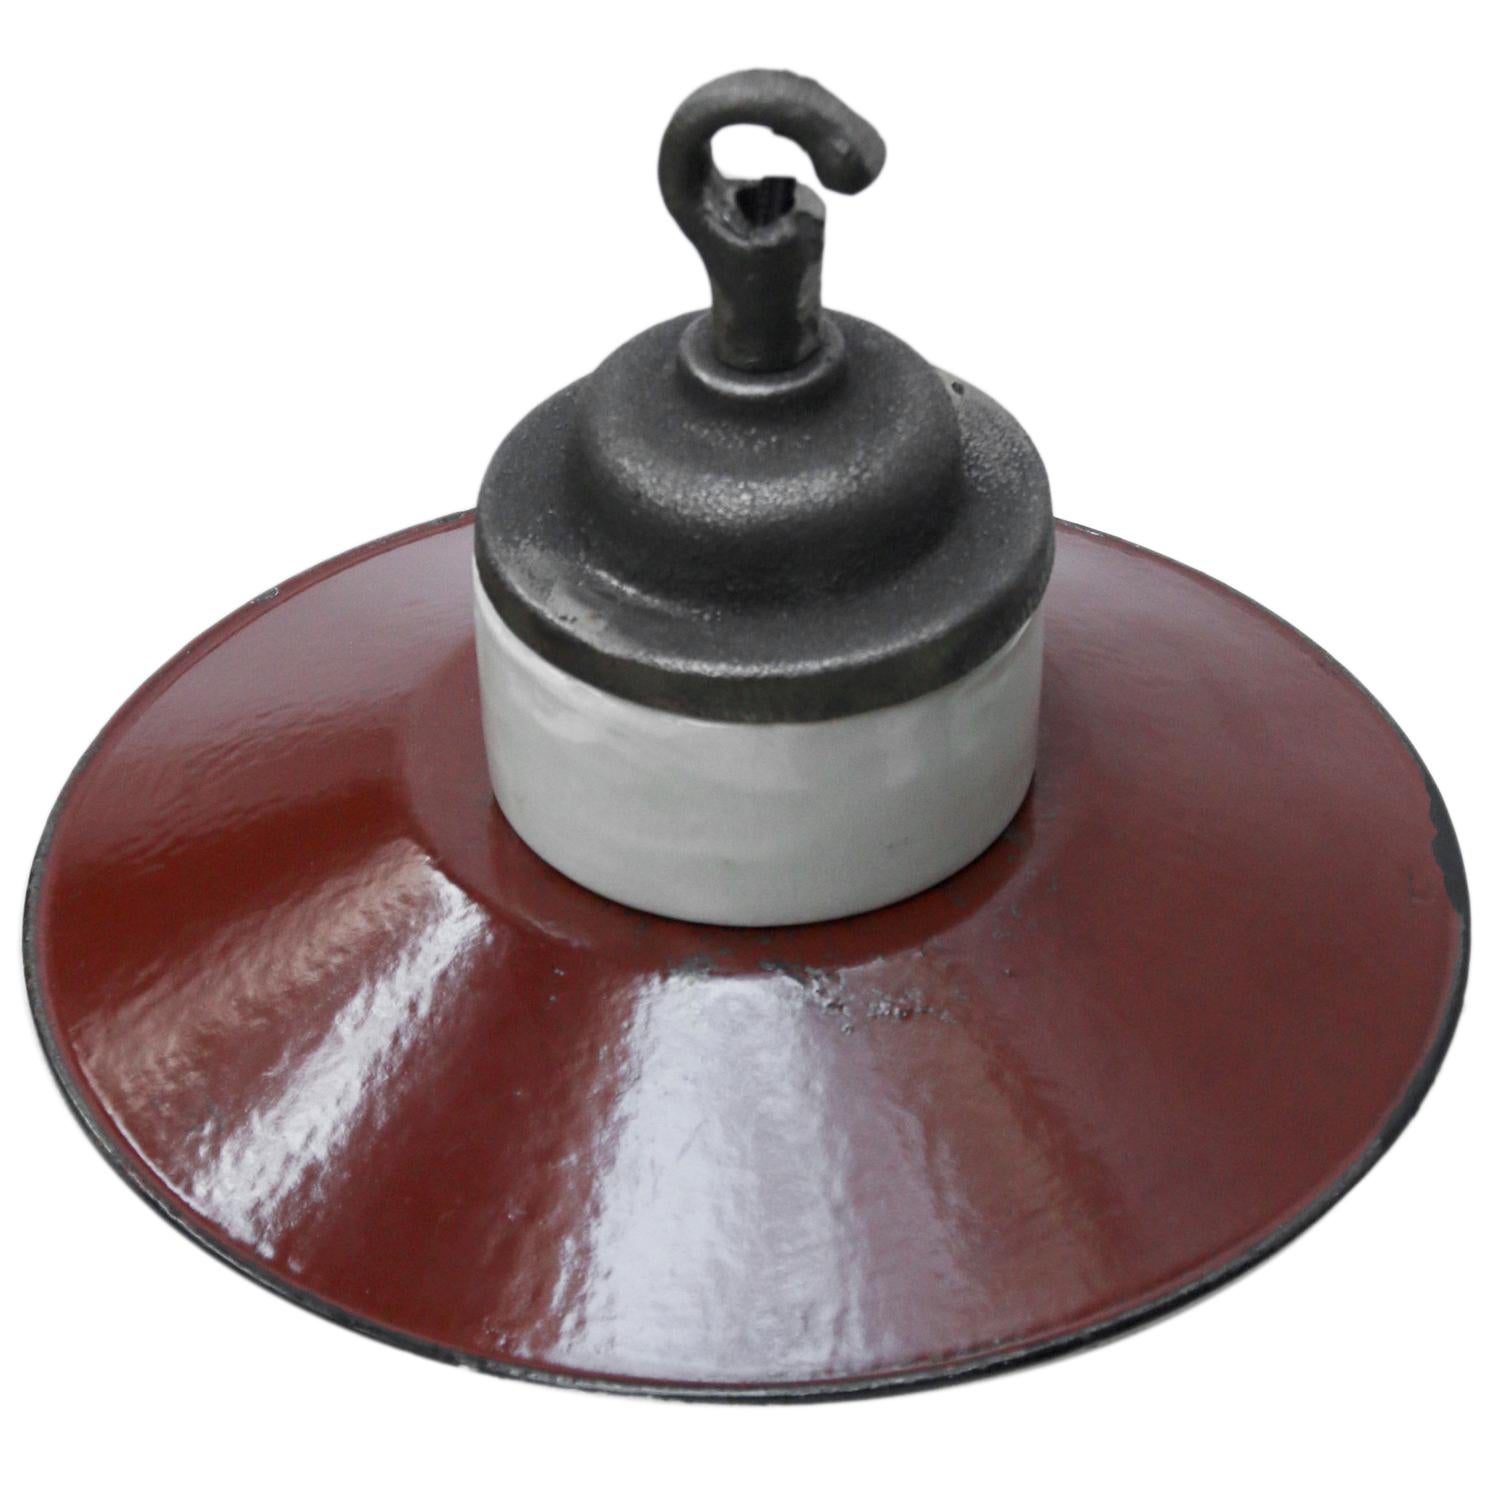 Porcelain Industrial hanging lamp.
White porcelain, cast iron and clear glass.
Red brown enamel shade
2 conductors, no ground.

Weight: 1.80 kg / 4 lb

Priced per individual item. All lamps have been made suitable by international standards